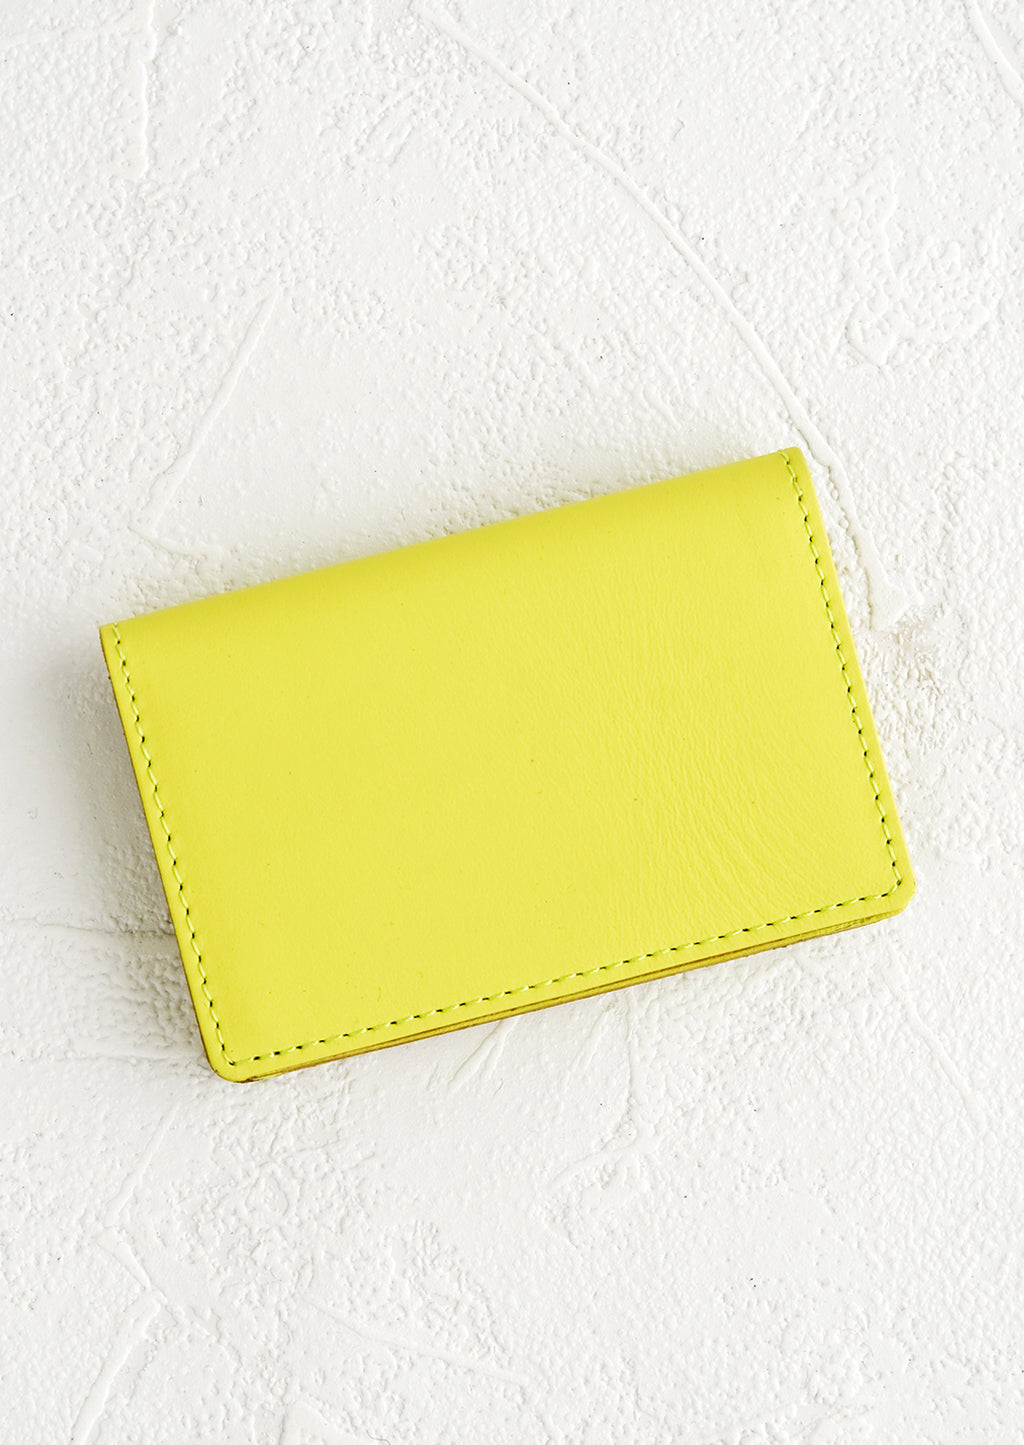 Neon Yellow: A small leather cardholder wallet in neon yellow.